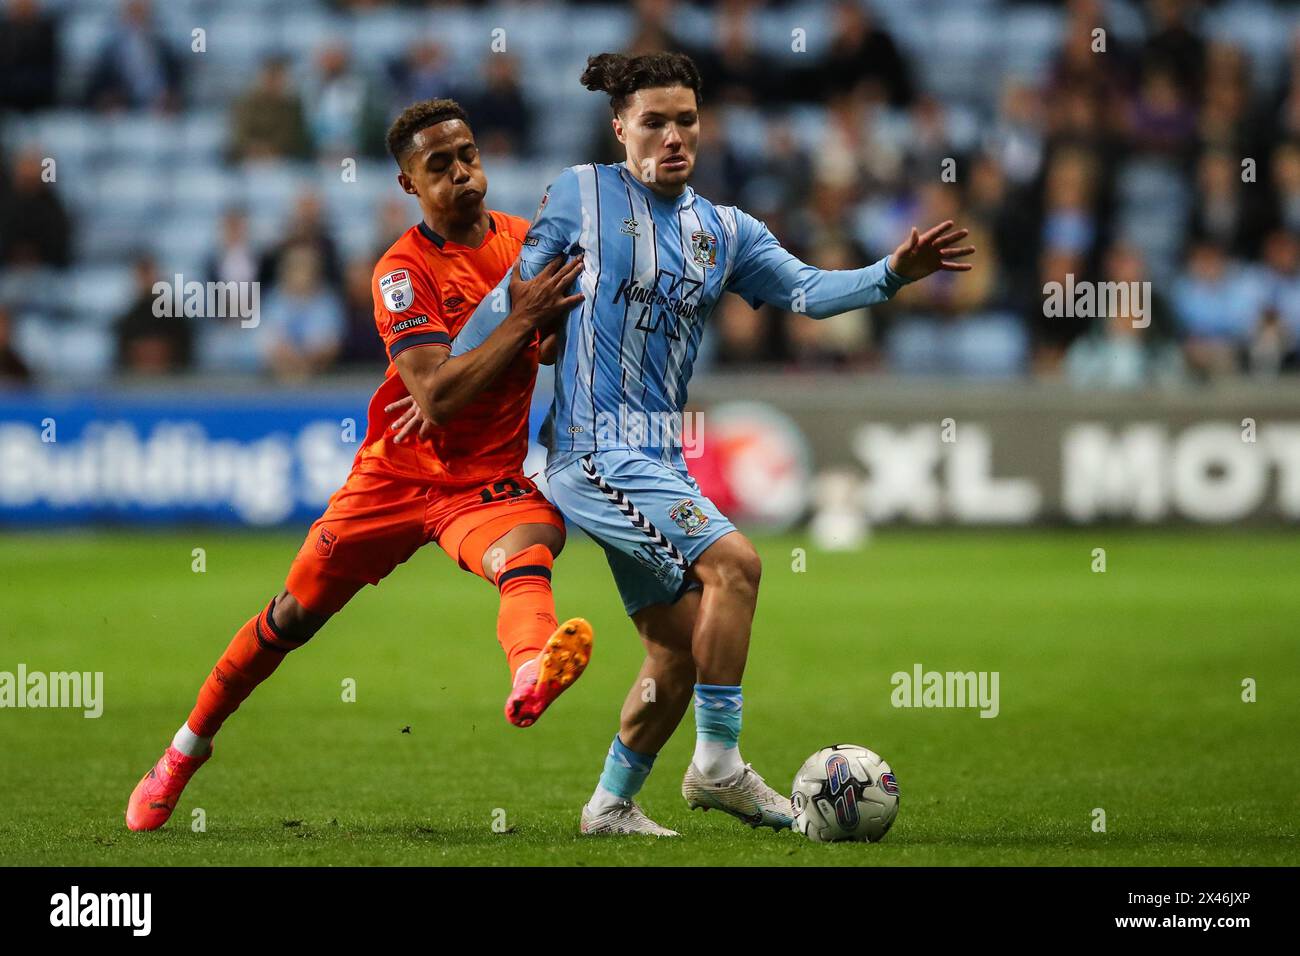 Callum O'Hare of Coventry City goes forward with the ball during the Sky Bet Championship match Coventry City vs Ipswich Town at Coventry Building Society Arena, Coventry, United Kingdom, 30th April 2024  (Photo by Gareth Evans/News Images) Stock Photo